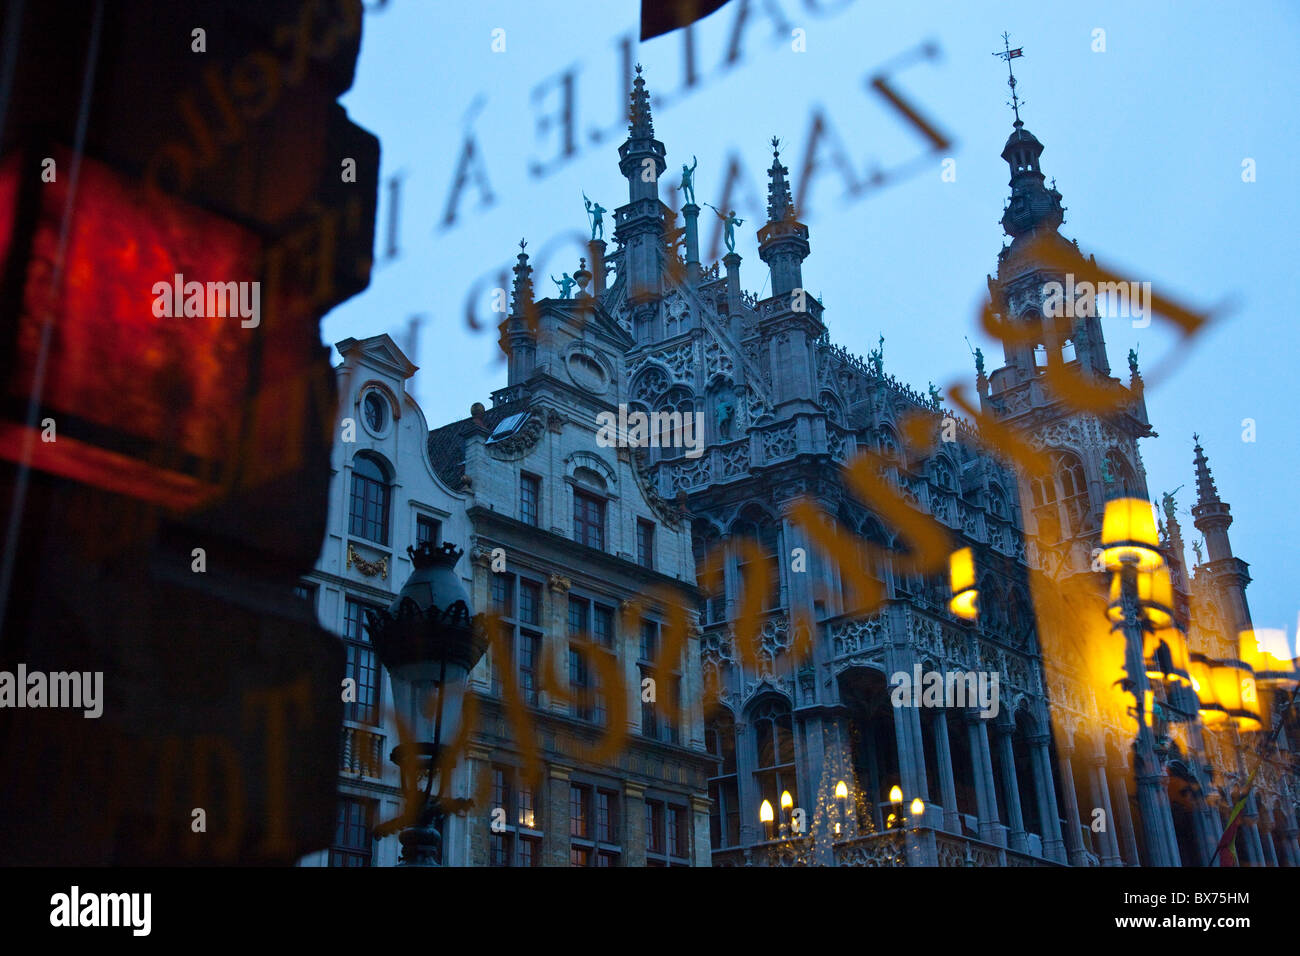 The Grand Place from inside a cafe, Brussels, Belgium Stock Photo